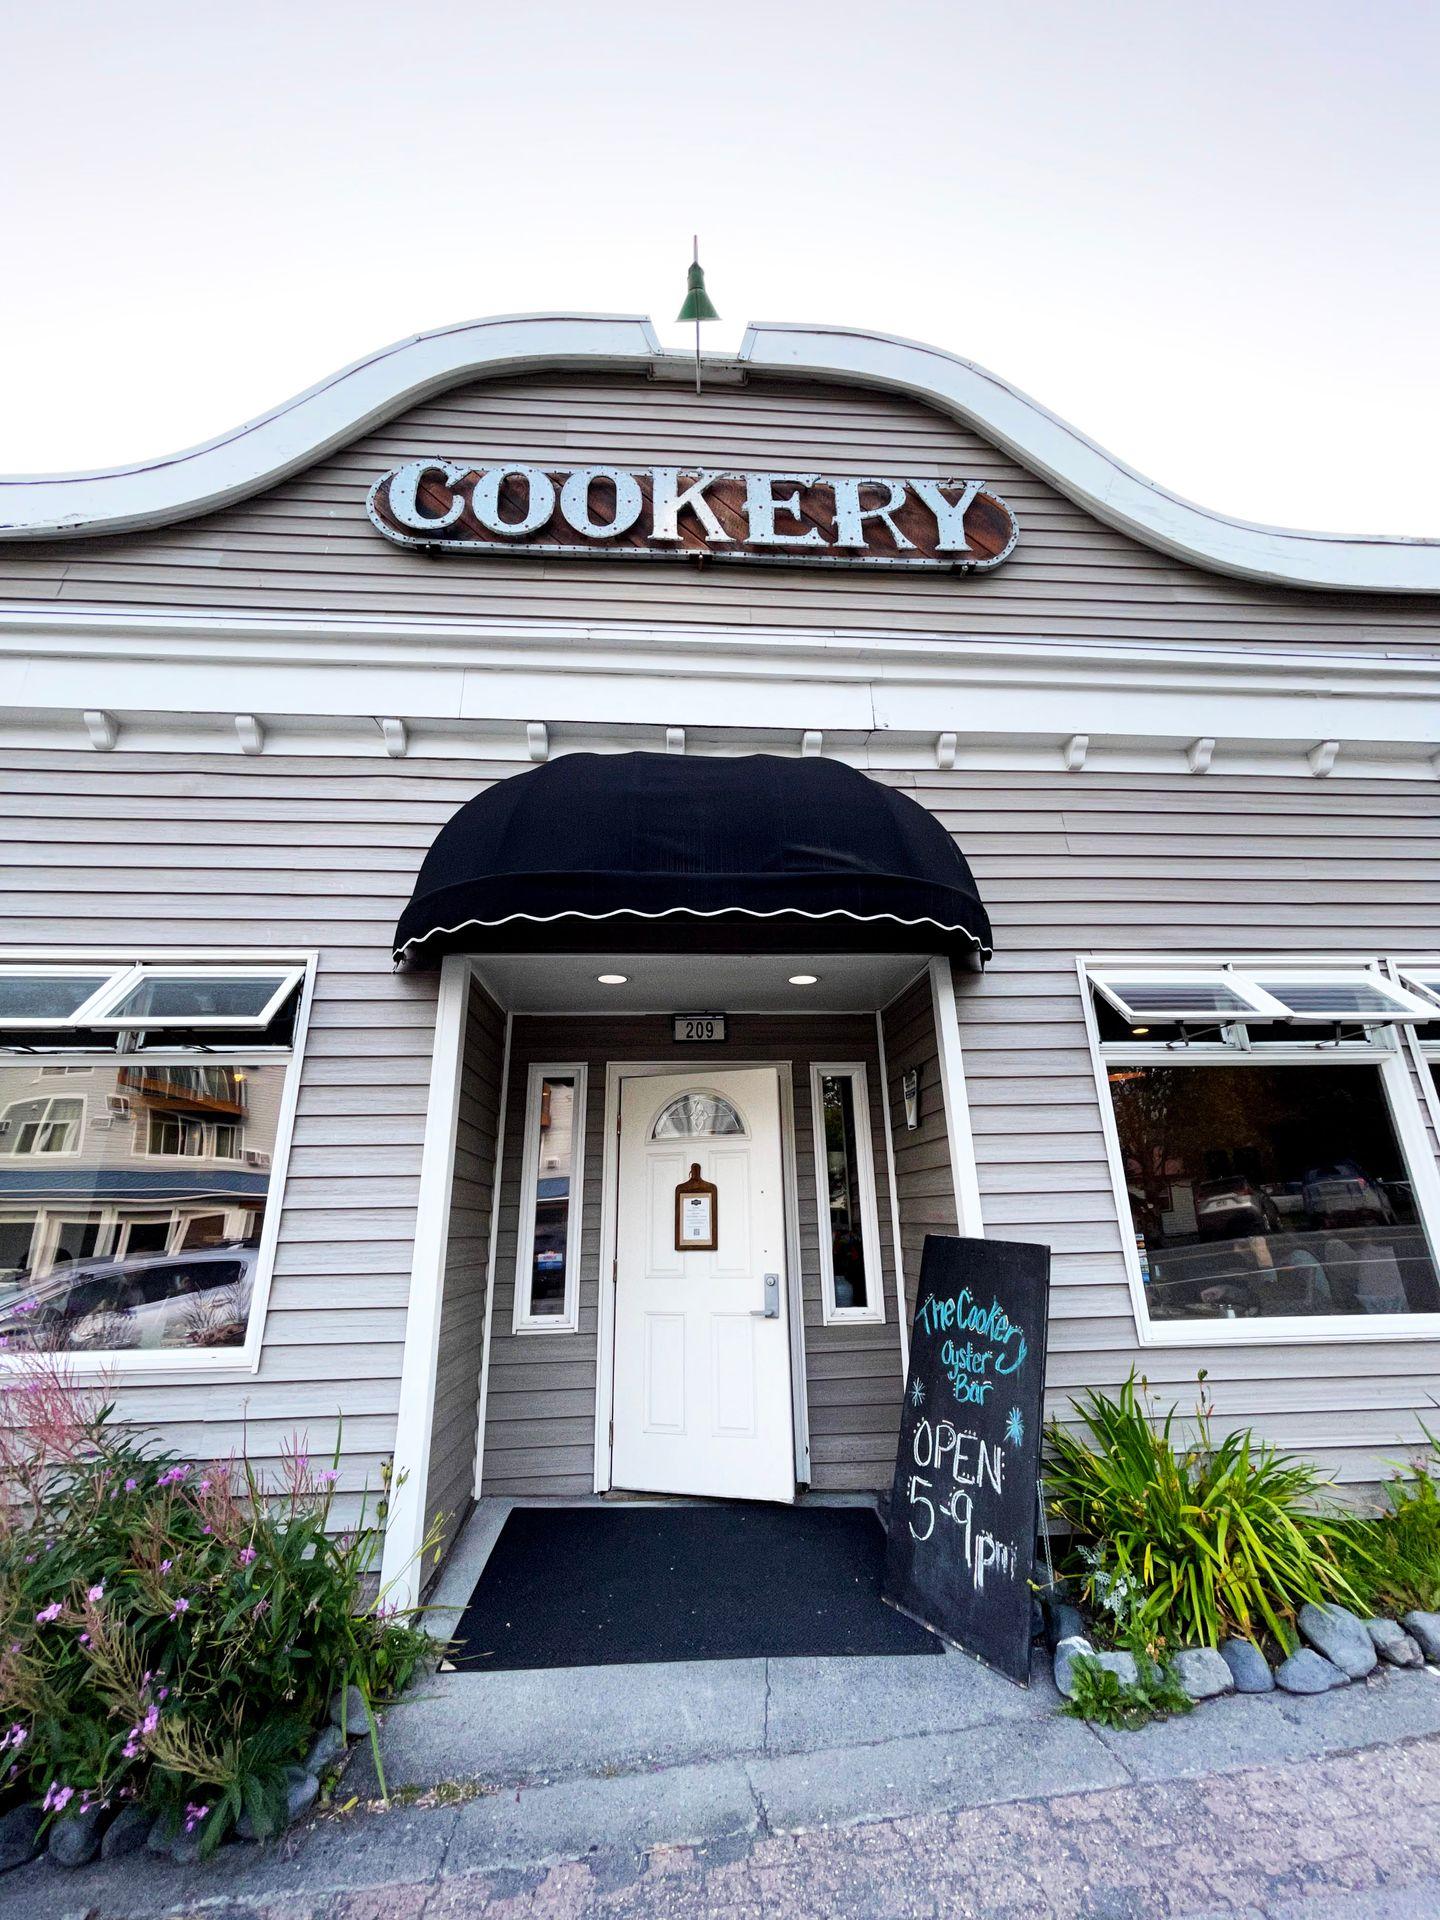 The exterior of the Cookery restaurant in Seward.